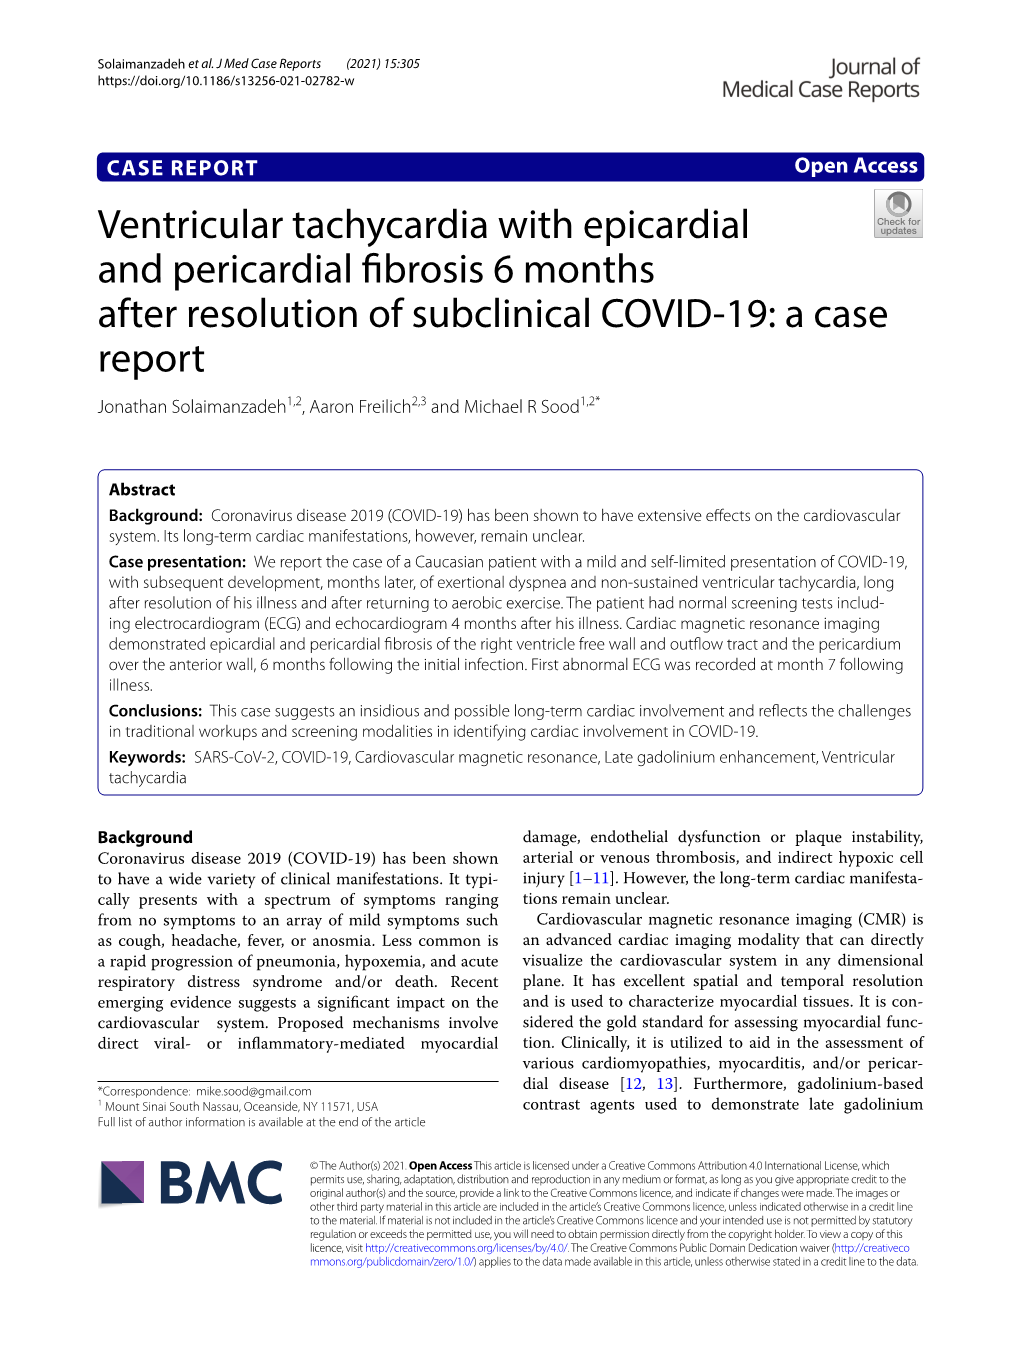 Ventricular Tachycardia with Epicardial and Pericardial Fibrosis 6 Months